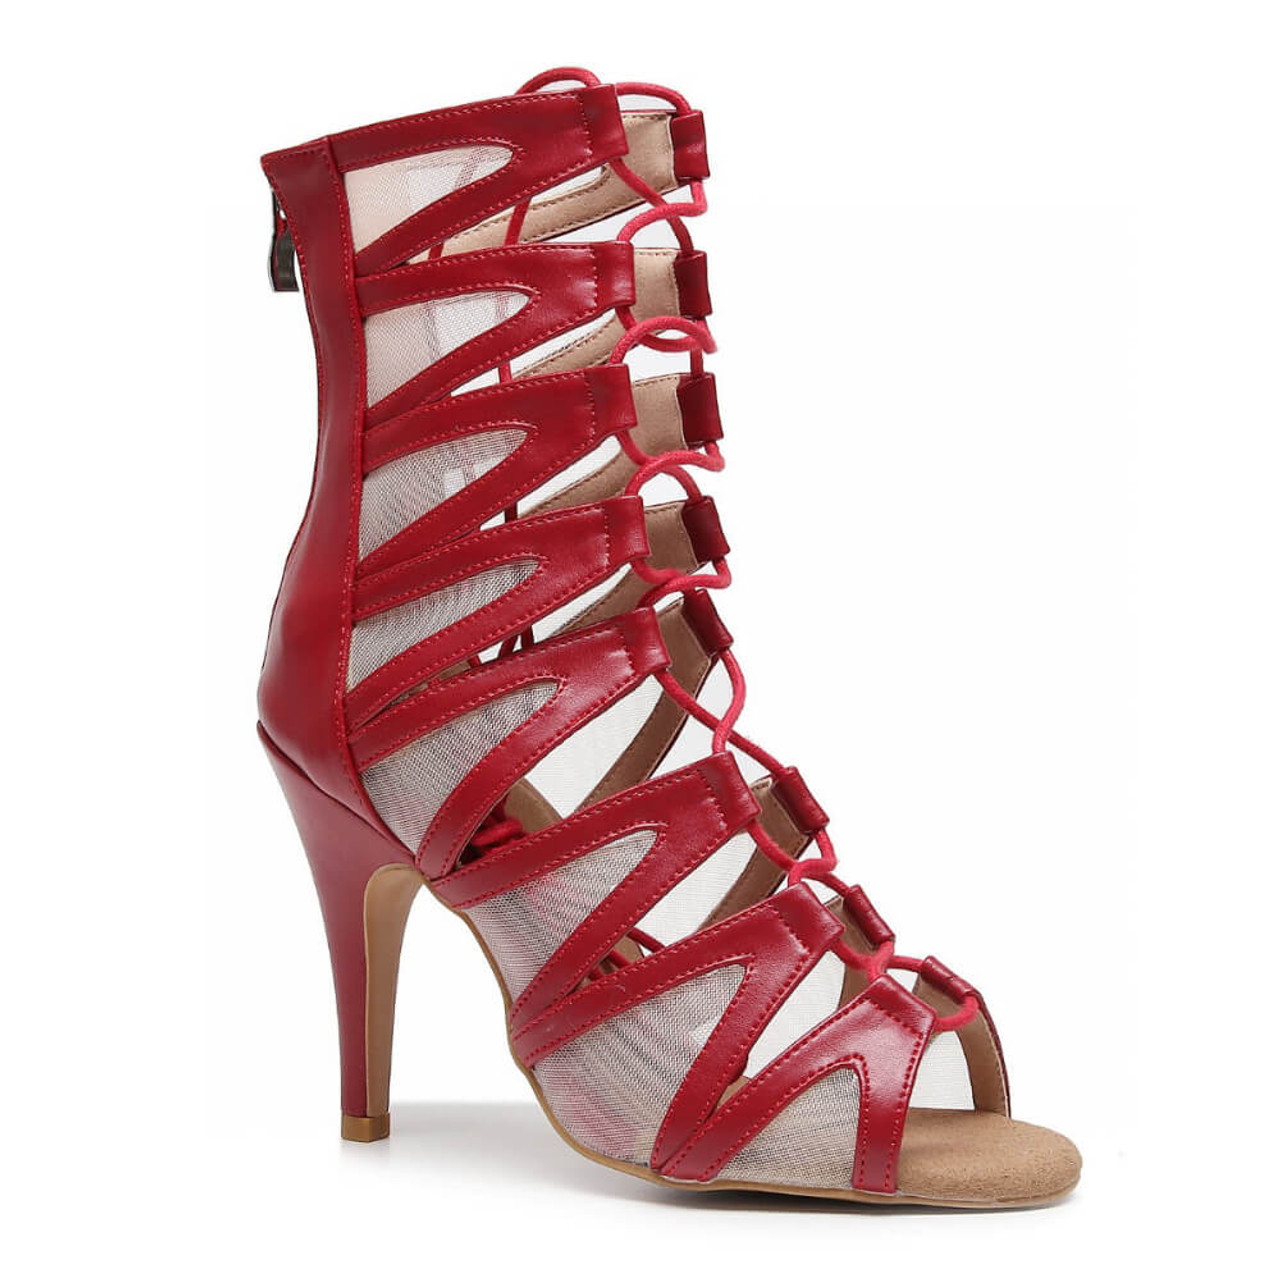 shoes, high heels, red sole, strappy black heels, prom - Wheretoget